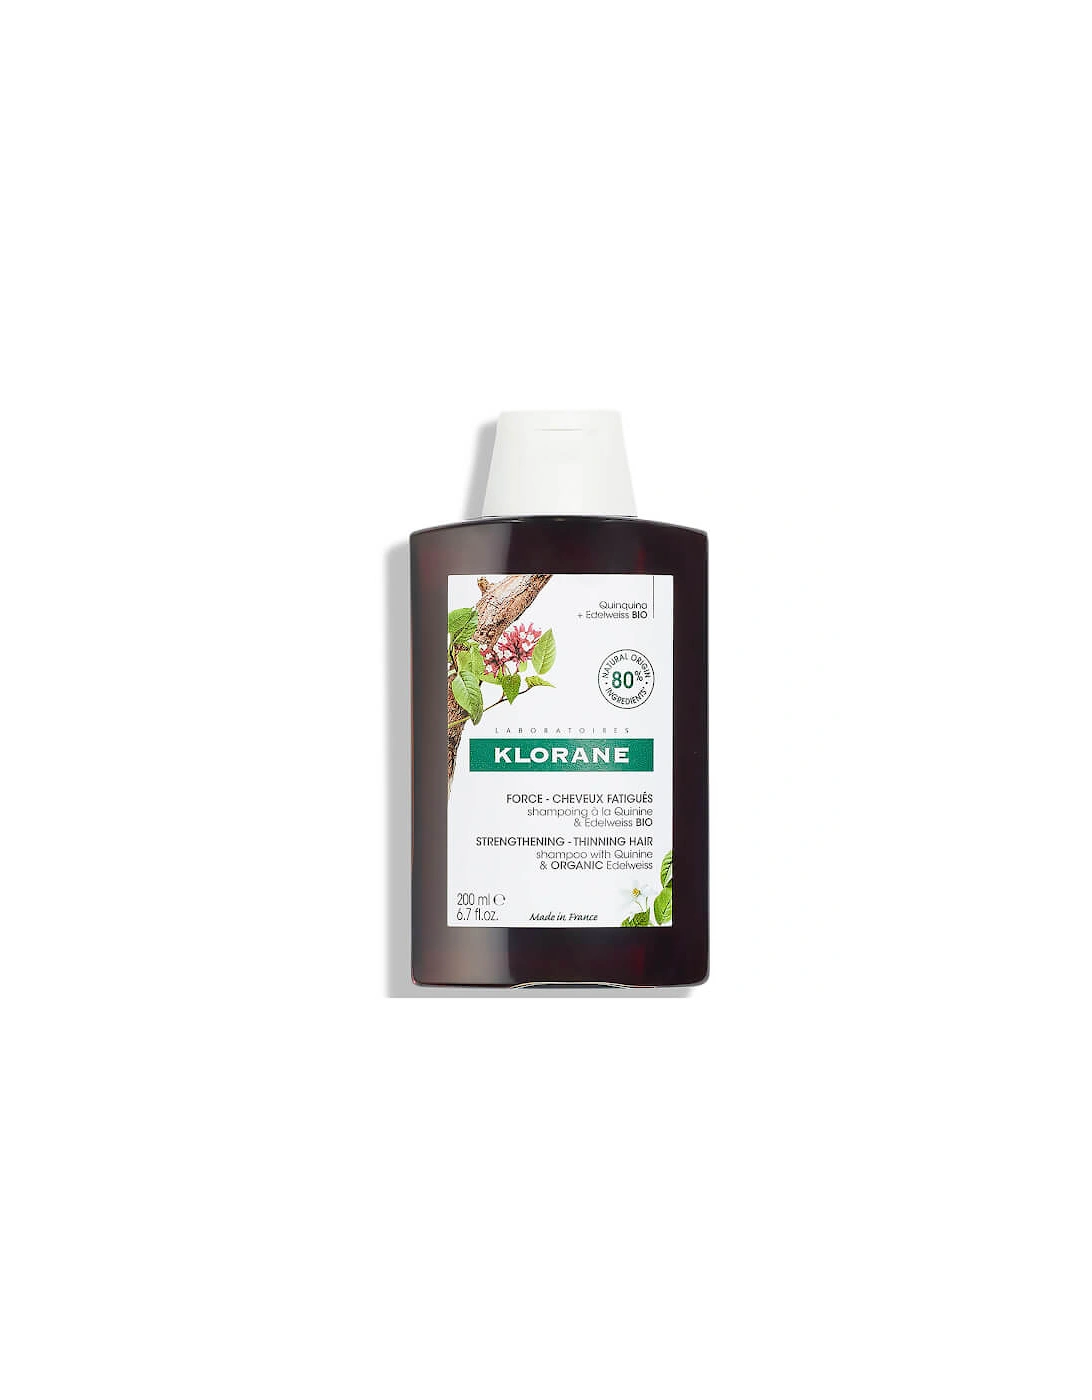 Strengthening Shampoo for Thinning, Tired Hair with Quinine and ORGANIC Edelweiss 200ml - KLORANE, 2 of 1